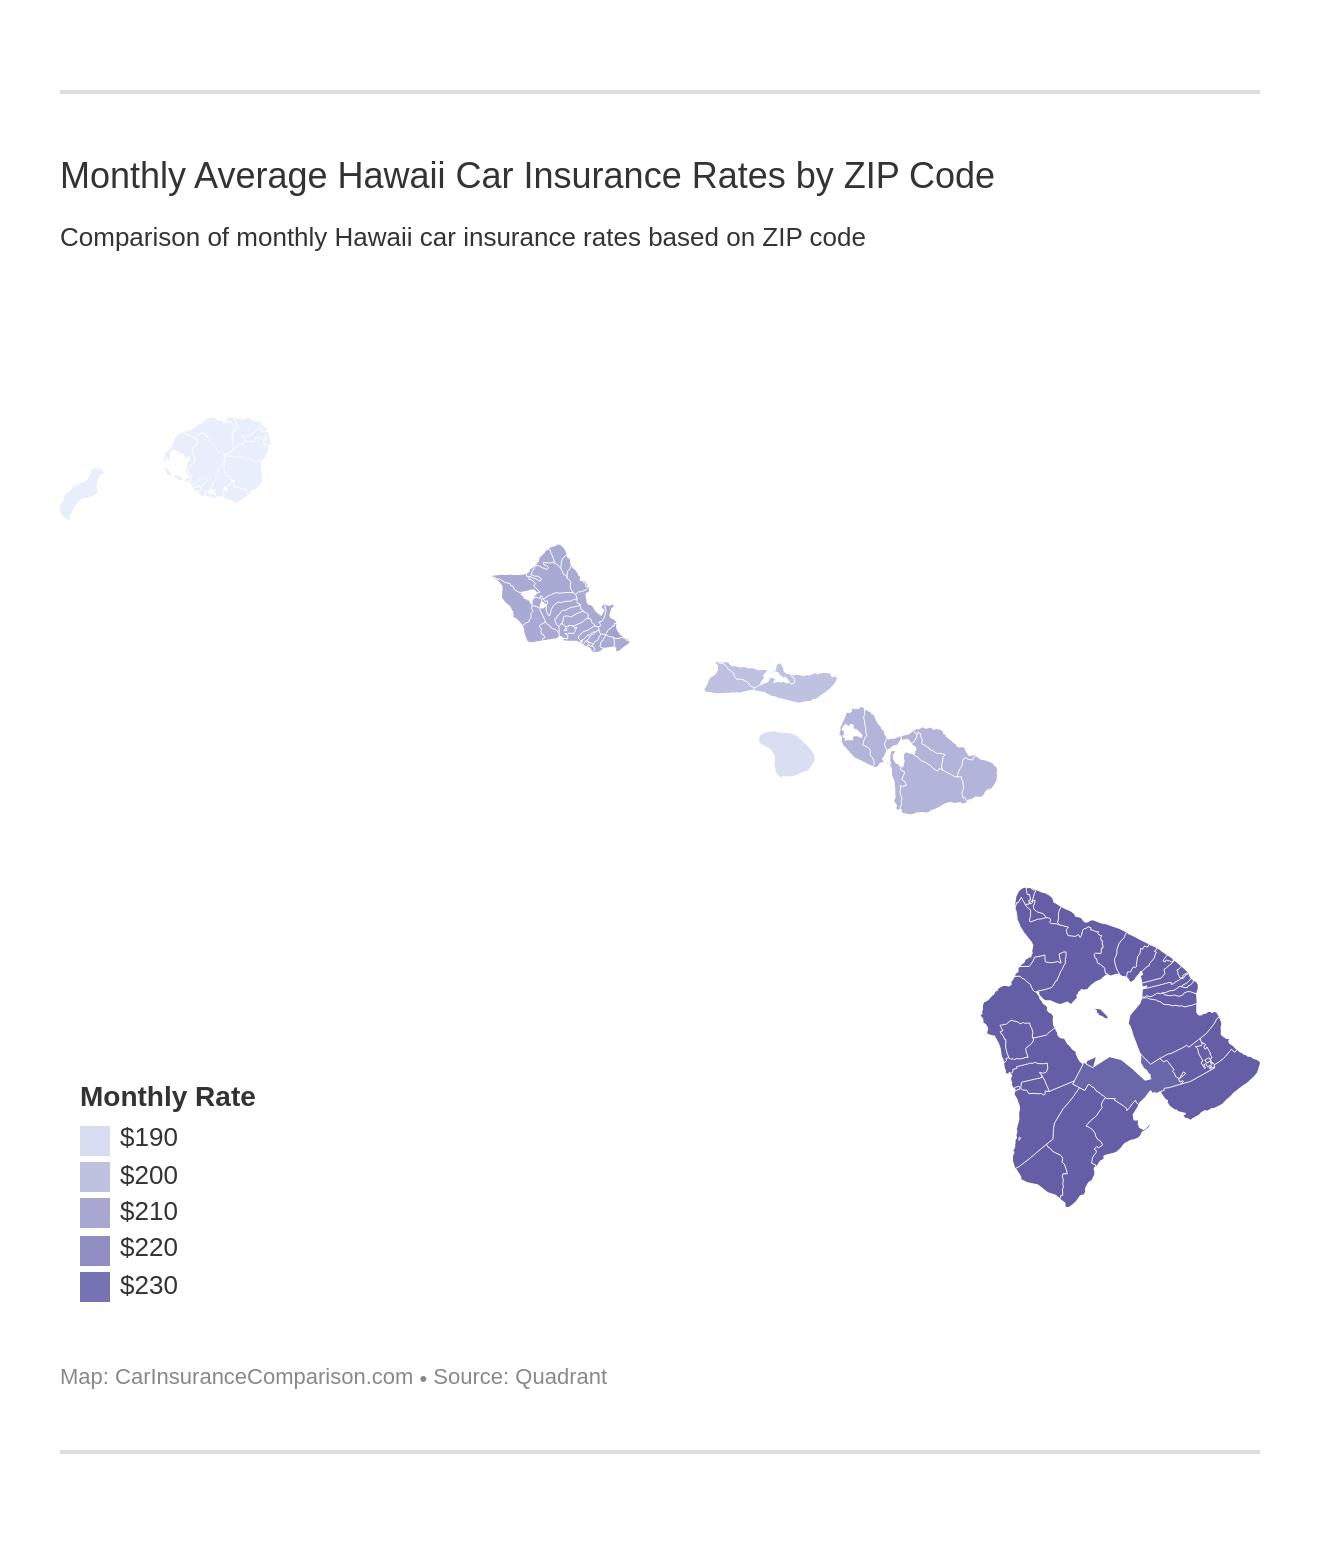 Monthly Average Hawaii Car Insurance Rates by ZIP Code